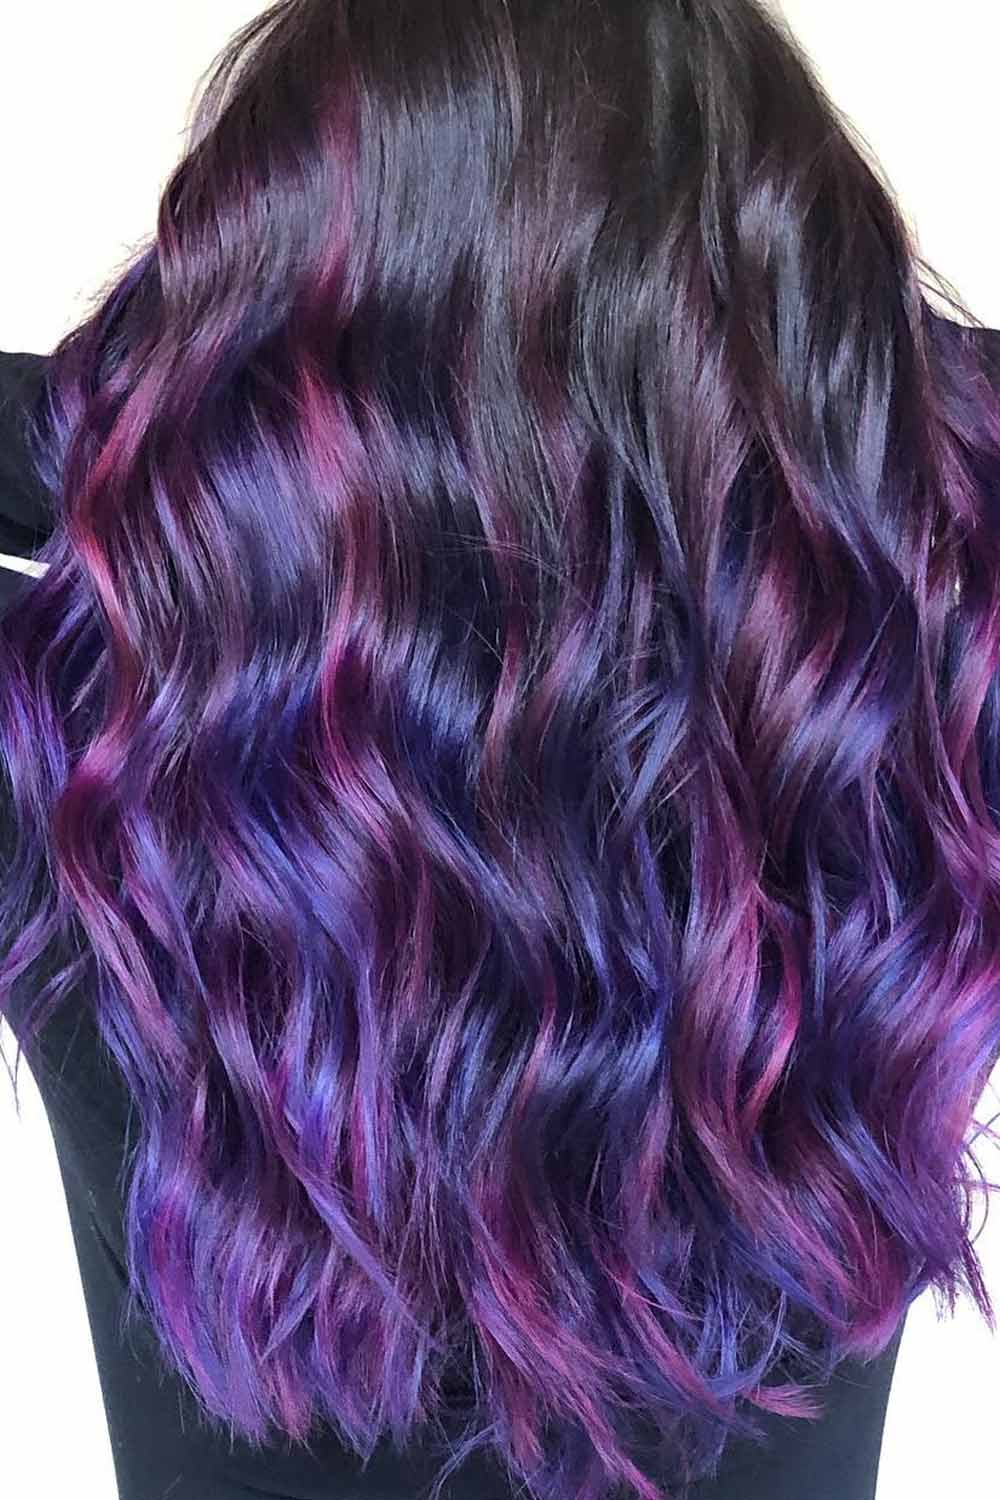 Blue and Purple Hair Trend